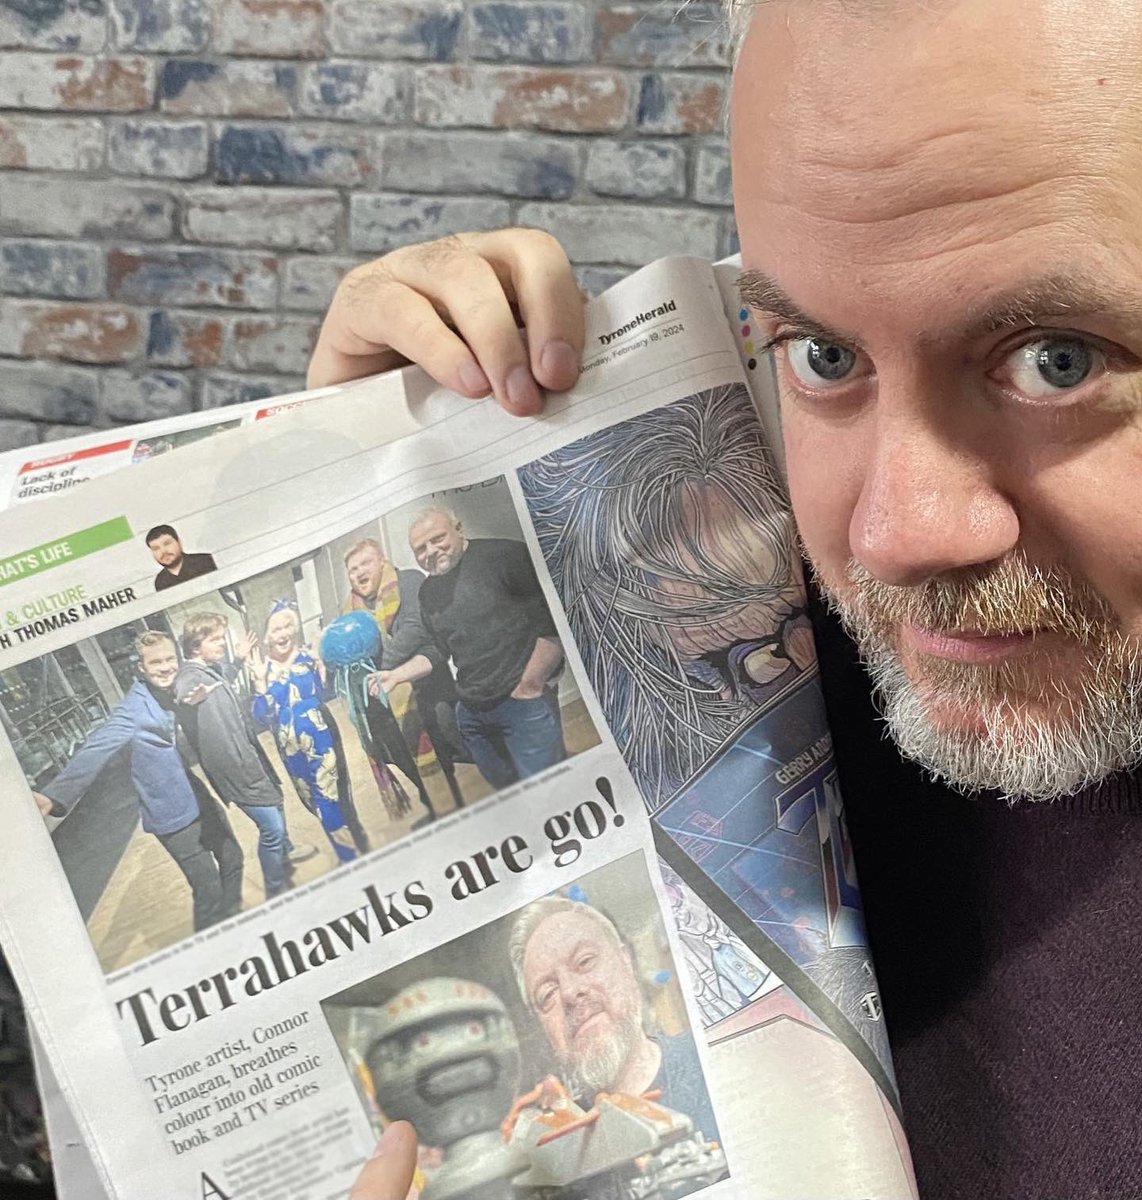 Very generous write up by @tdmaher1 in the Tyrone Herald today including some of my Art from Terrahawks Deep Blue Z. Pleased to be able to share my story with the denizens of Tyrone and beyond. Also featured are @chrisxl5 @filminabottle and @ryan_the_dalek_man #wearetyrone